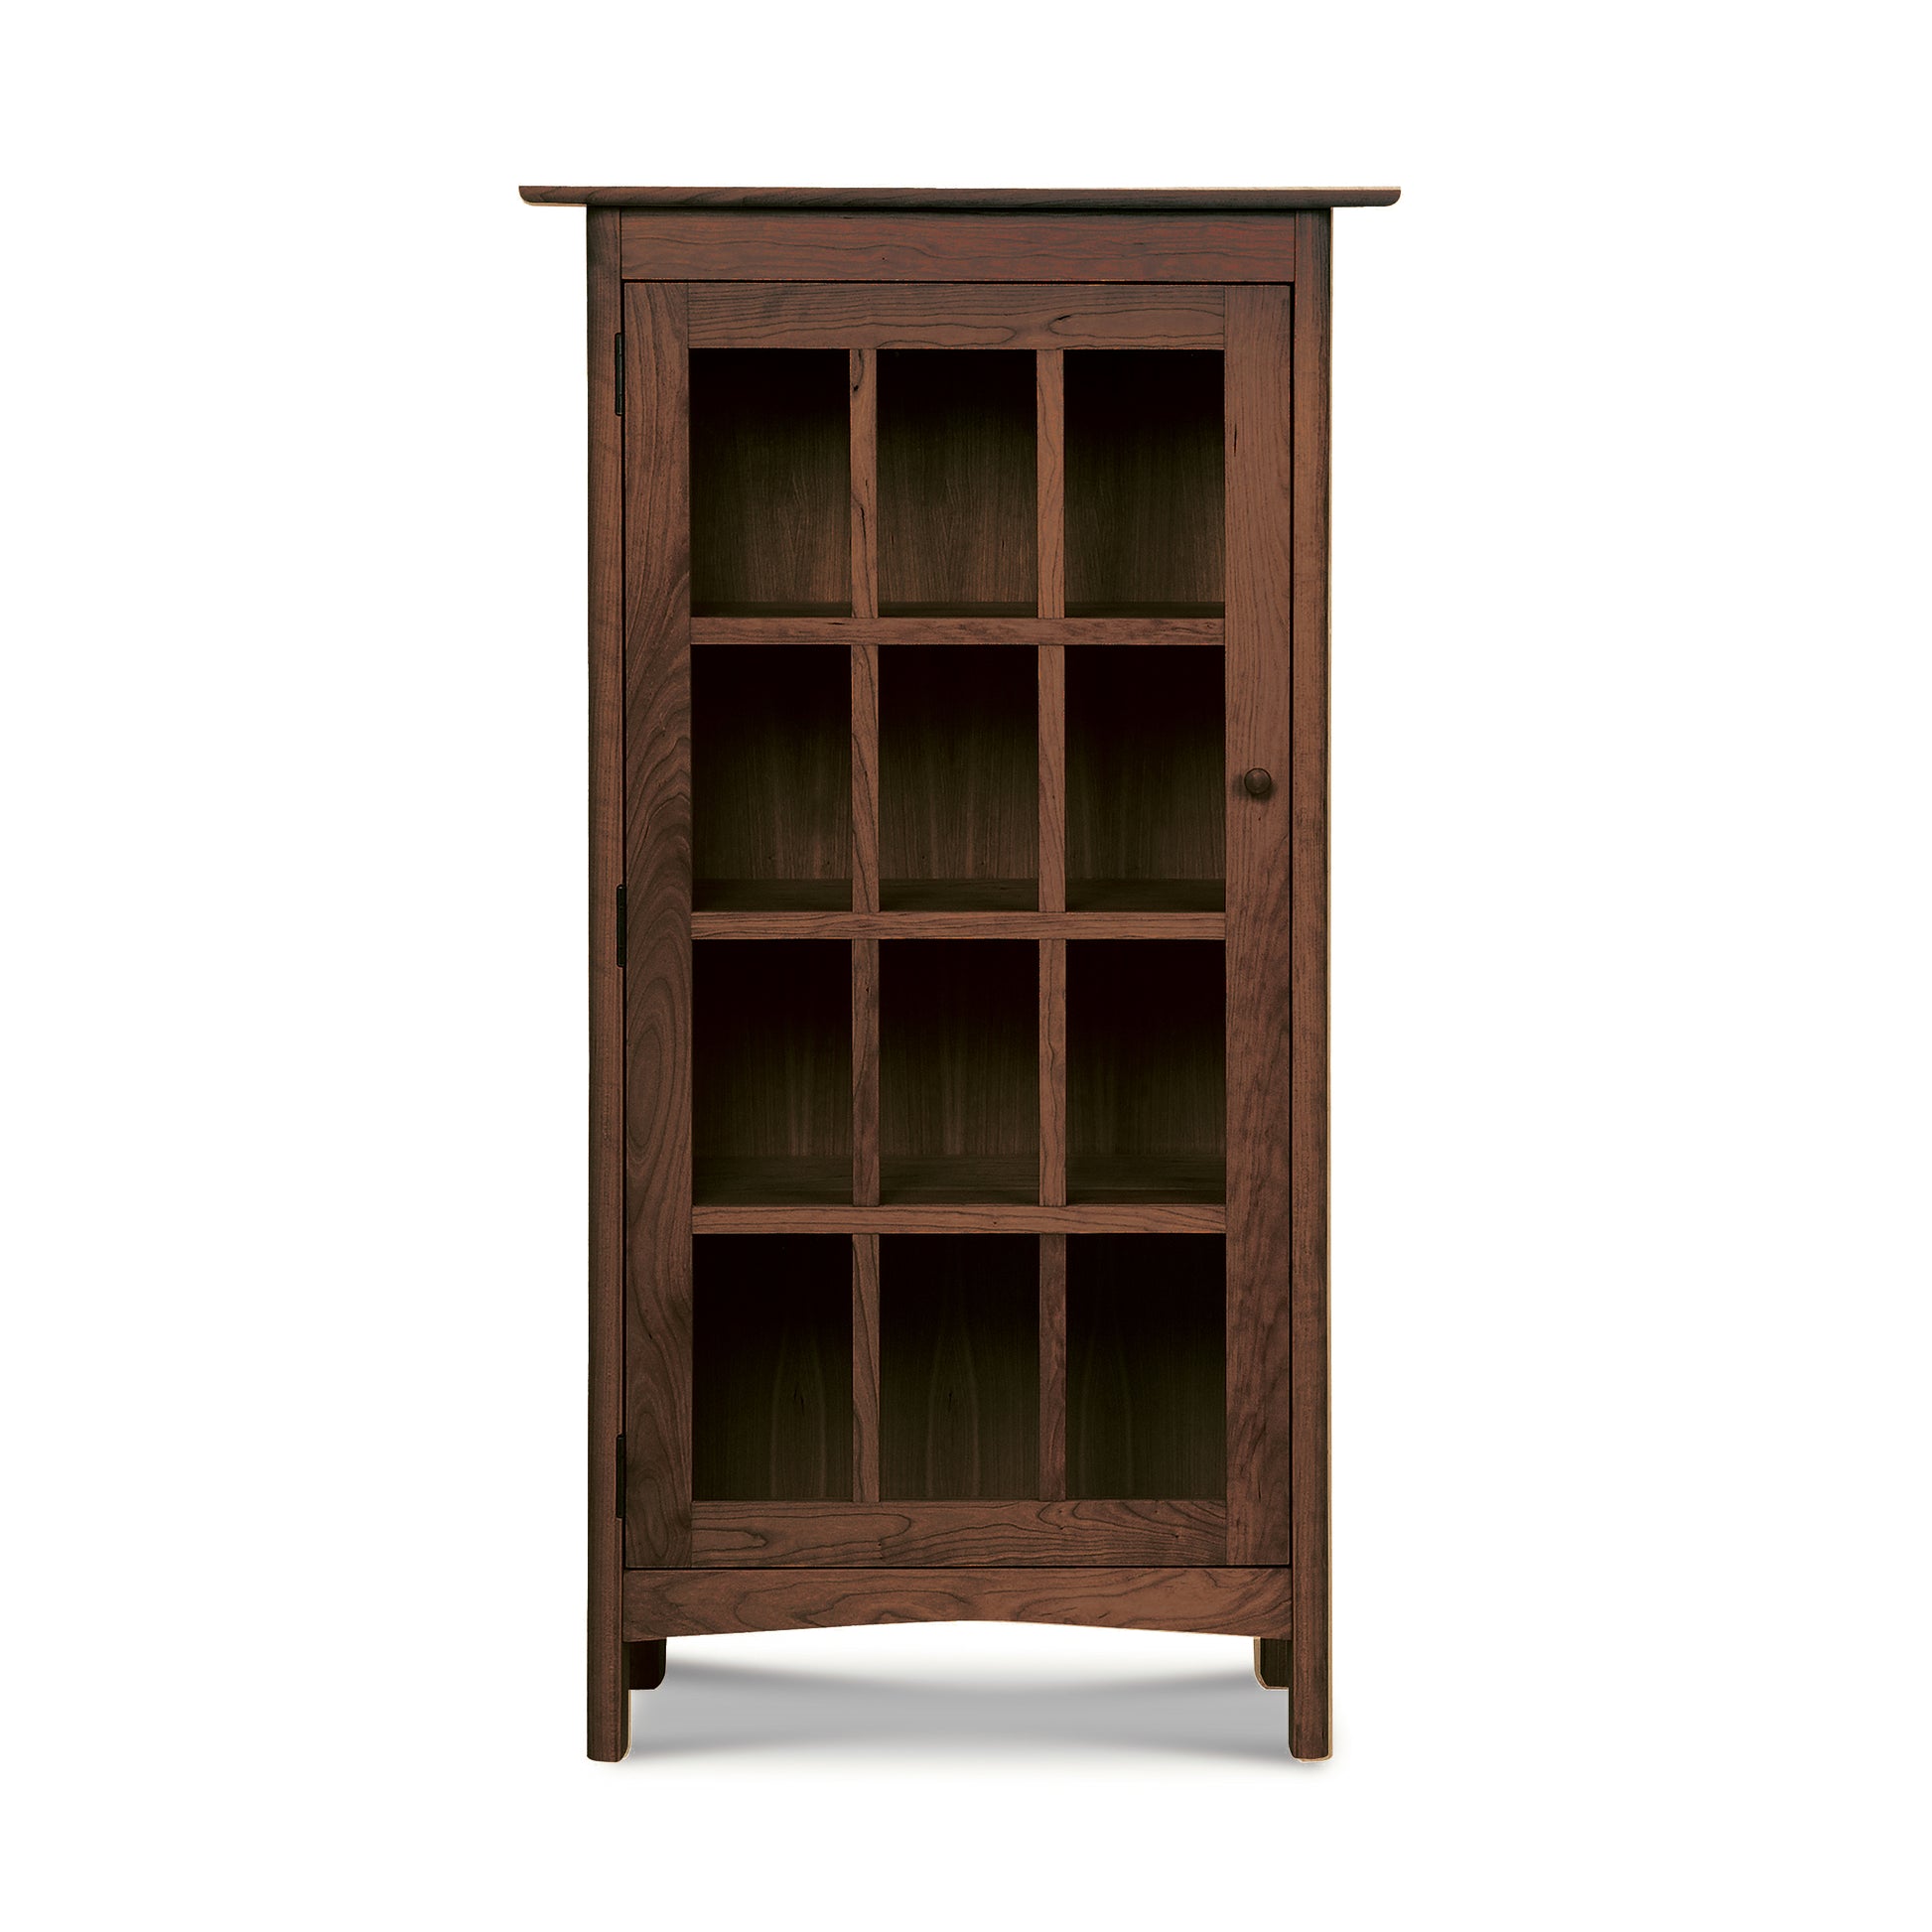 A Vermont Furniture Designs Heartwood Shaker Glass Door Bookcase against a white background.